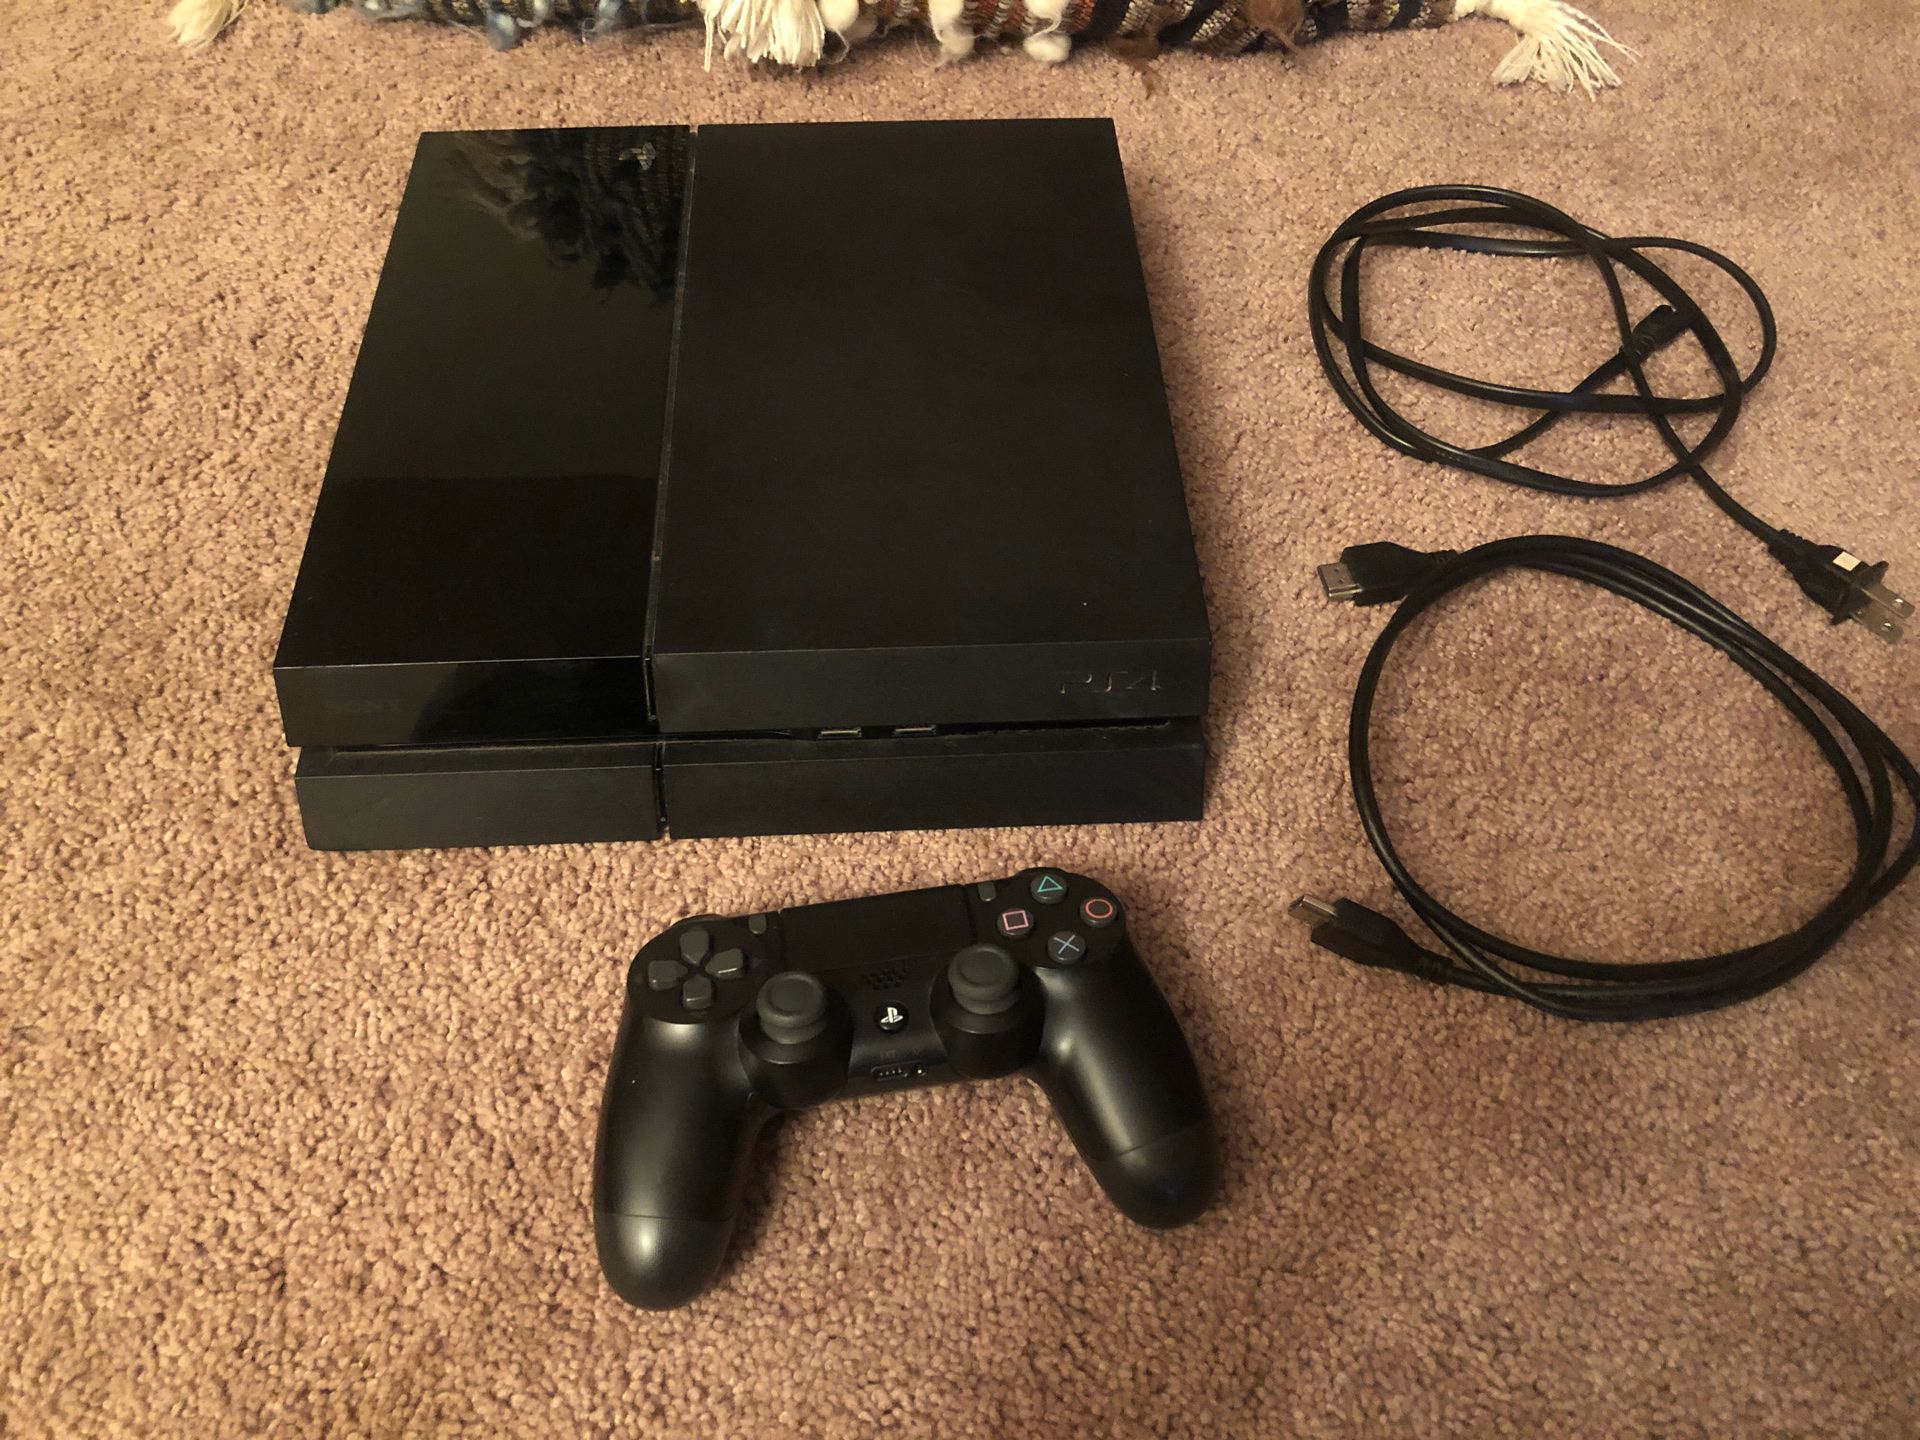 Ps4 with controller + 3 games